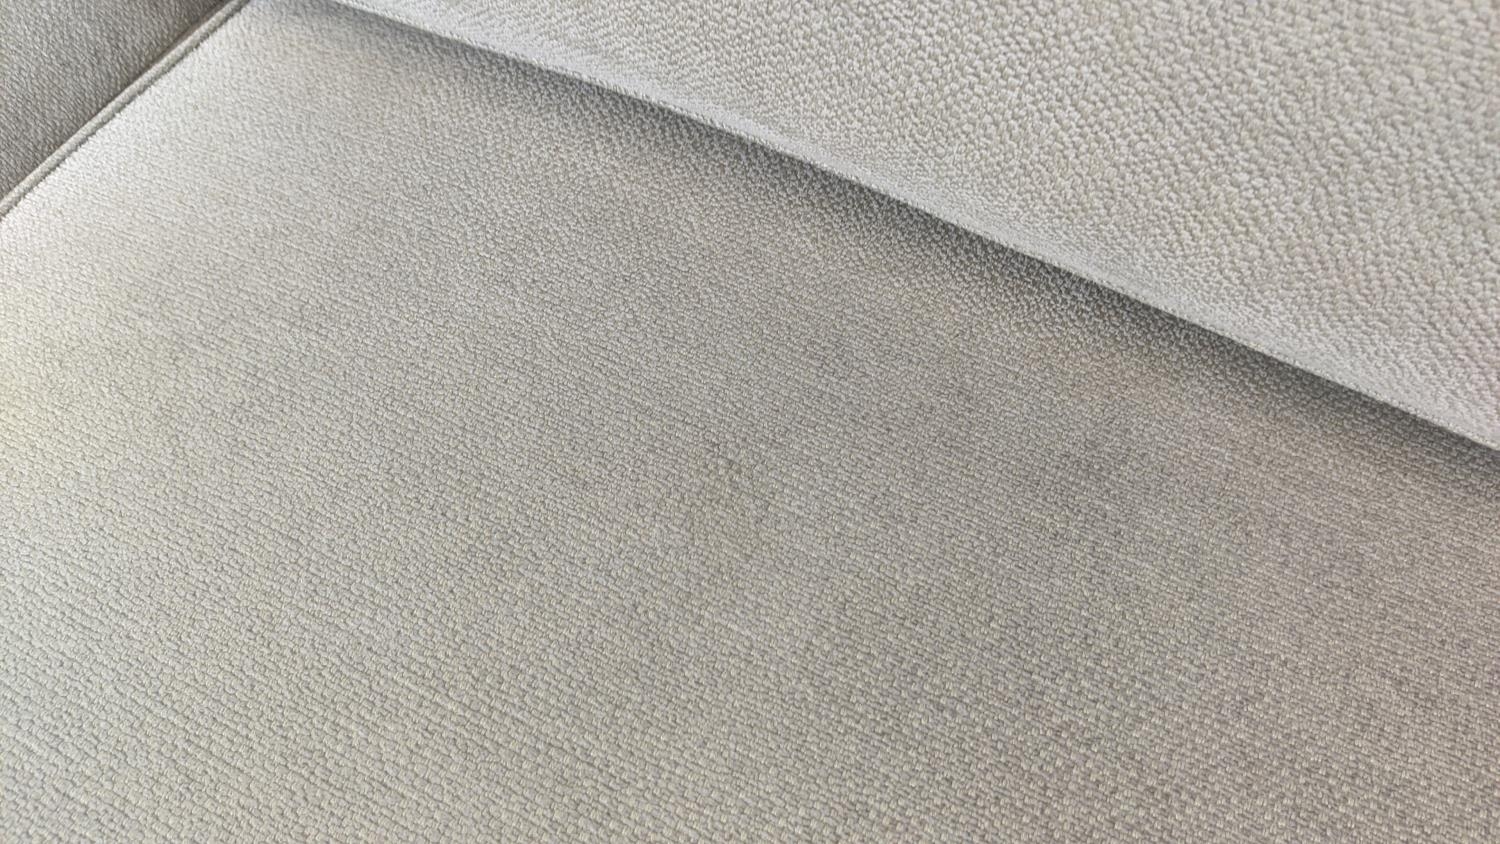 KINGCOME MANHATTAN SOFA, in neutral fabric upholstery, 210cm x 95cm x 78cm H. - Image 7 of 8